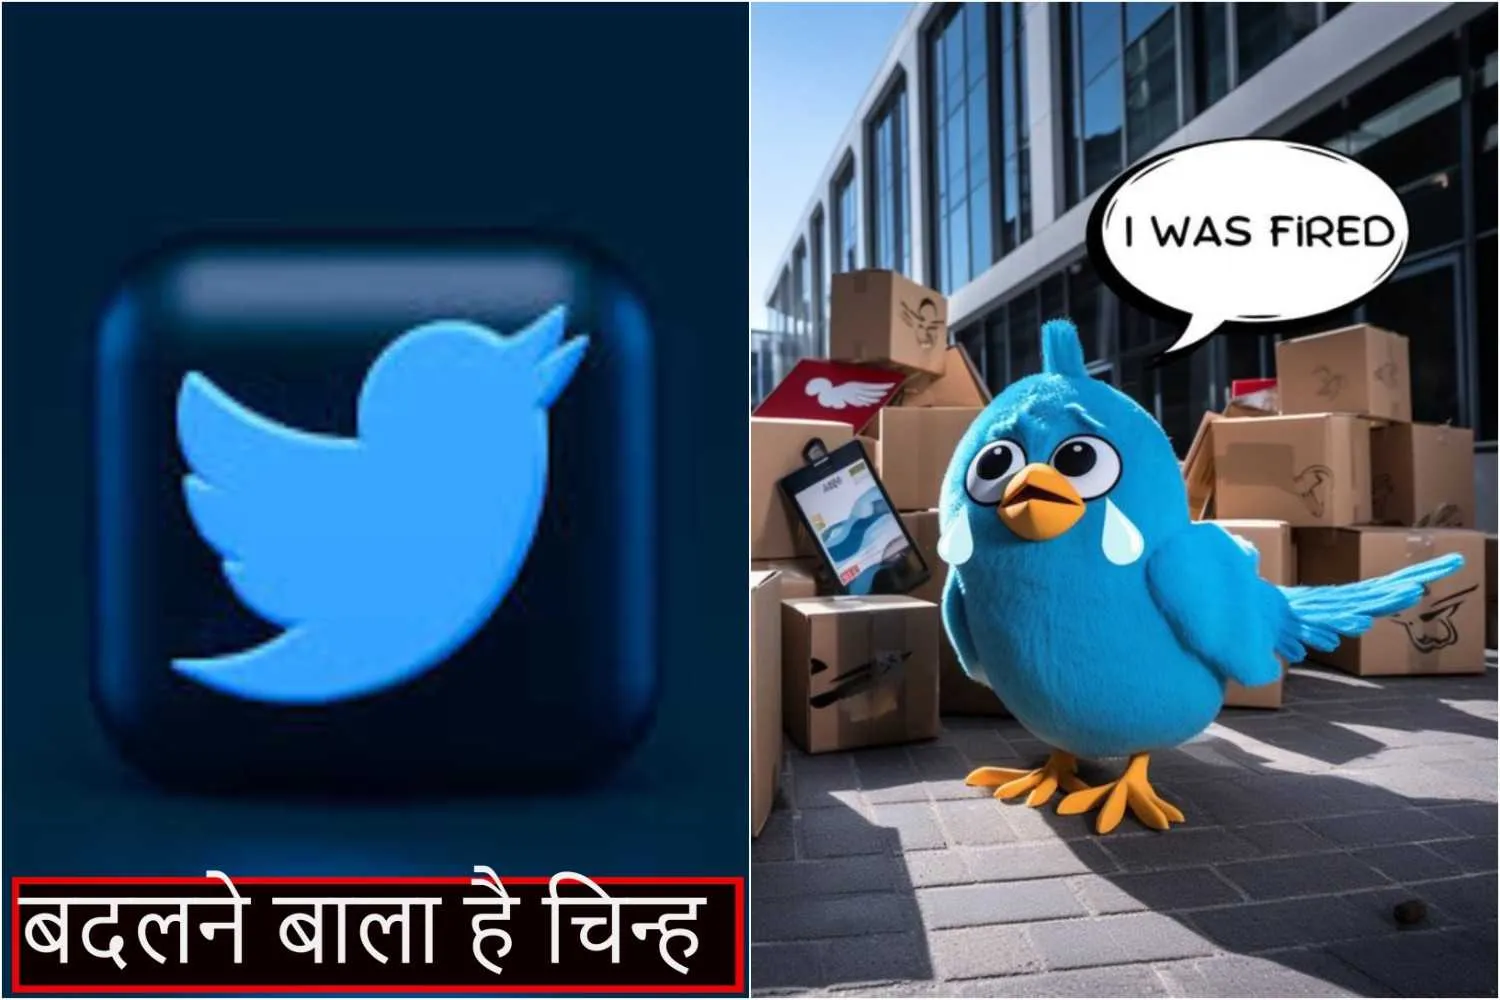 Twitter to change its logo